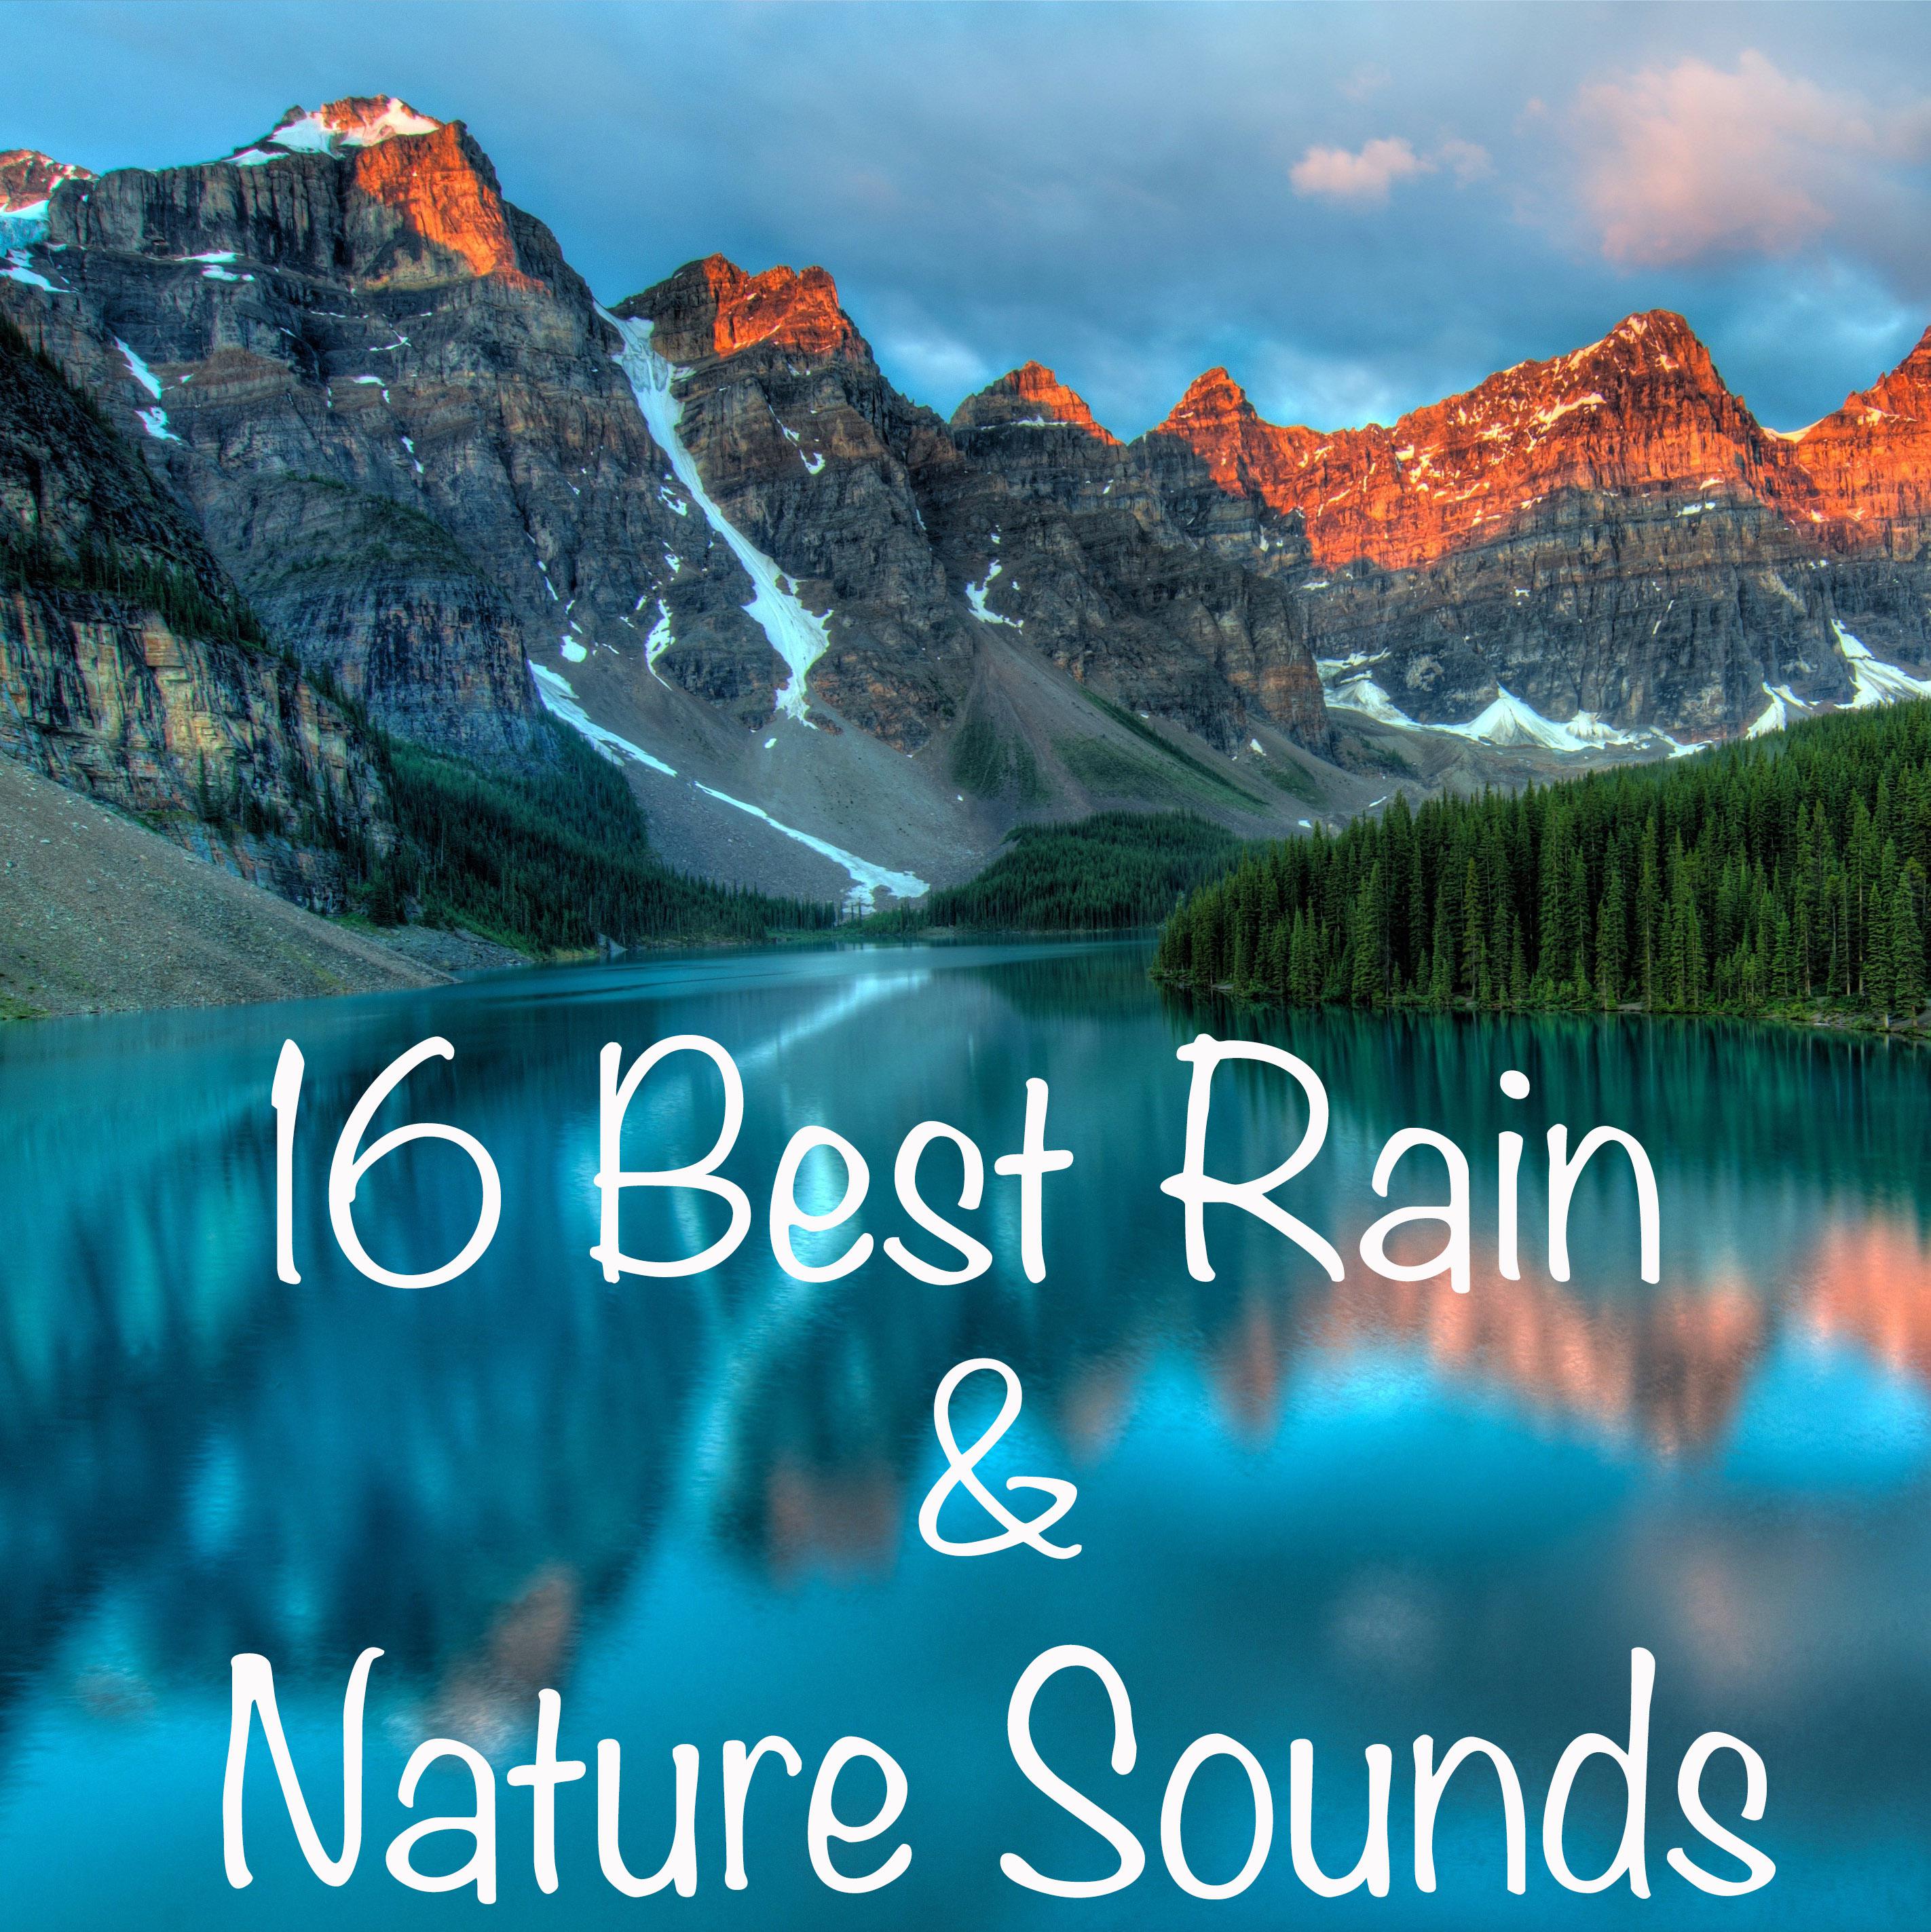 16 Best Rain And Nature Sounds with no Fades